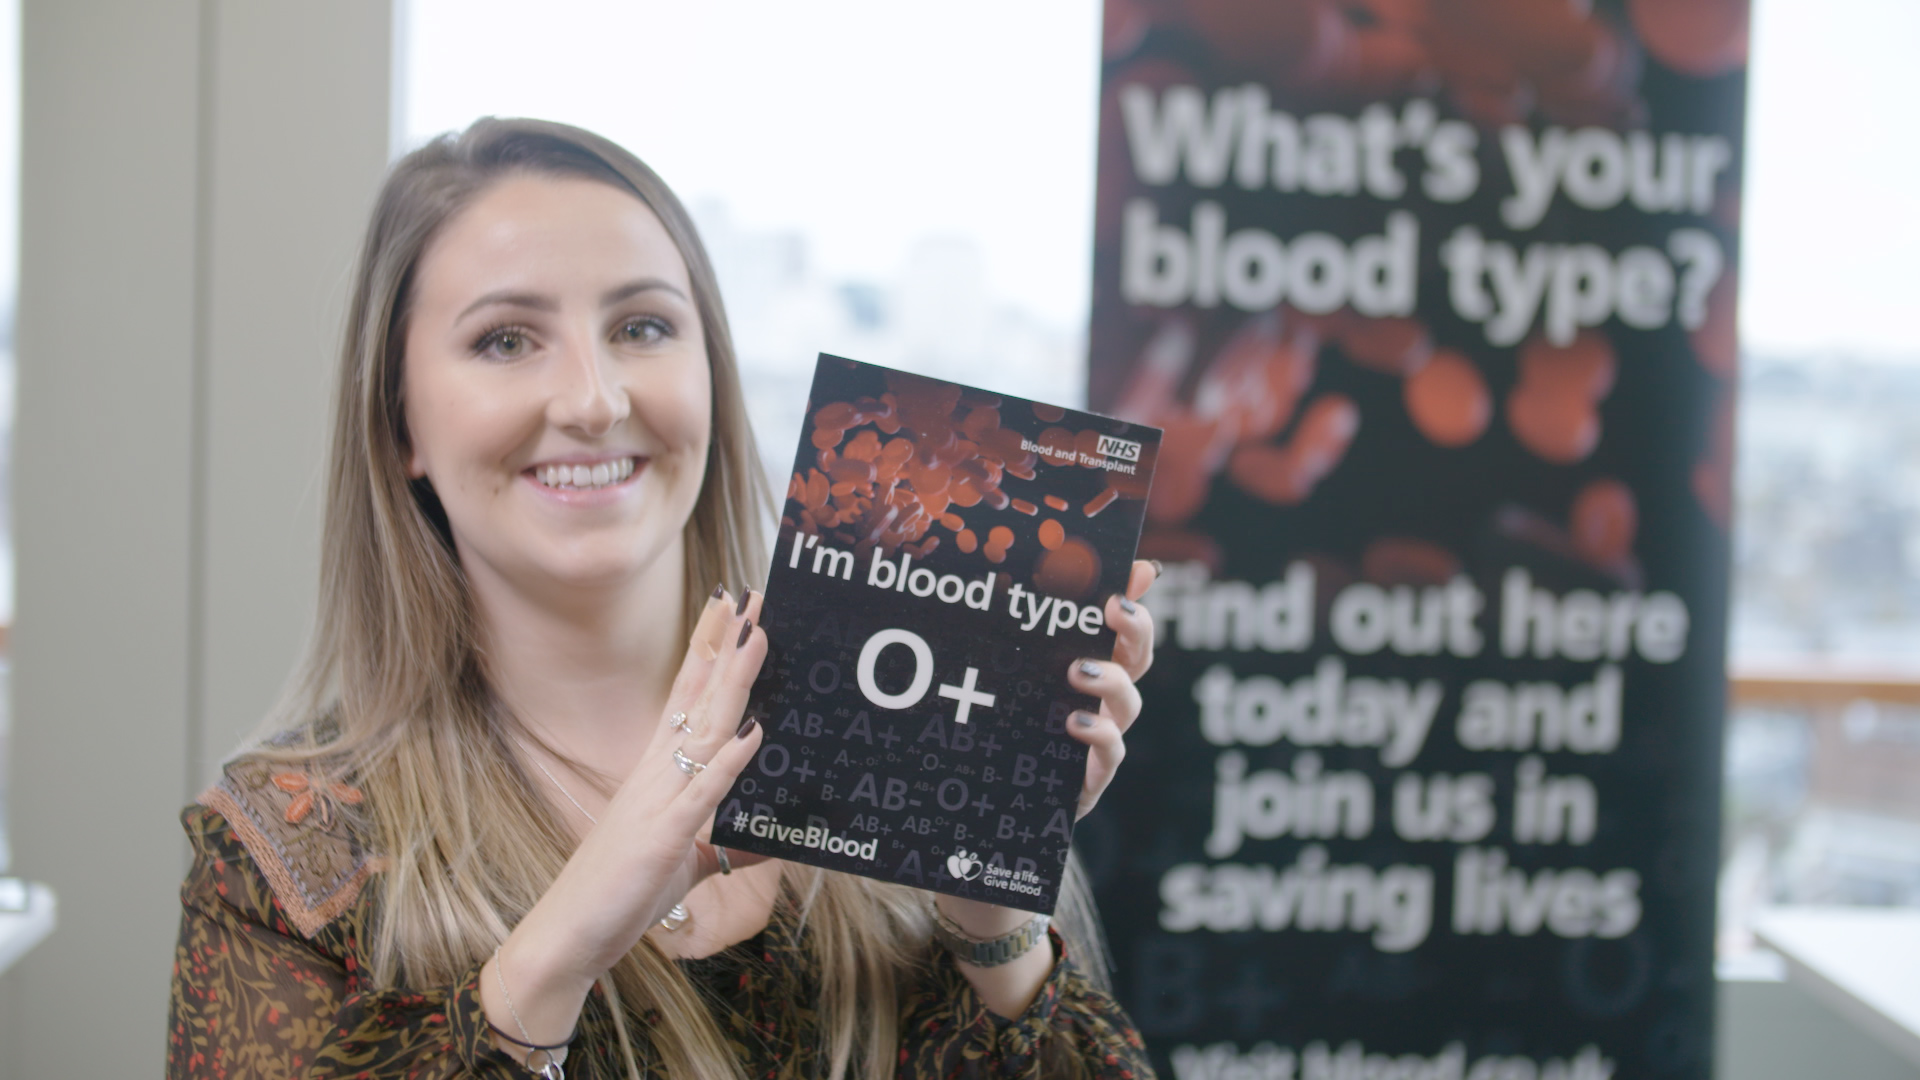 A young woman poses with a card that says, "I'm blood type O+"